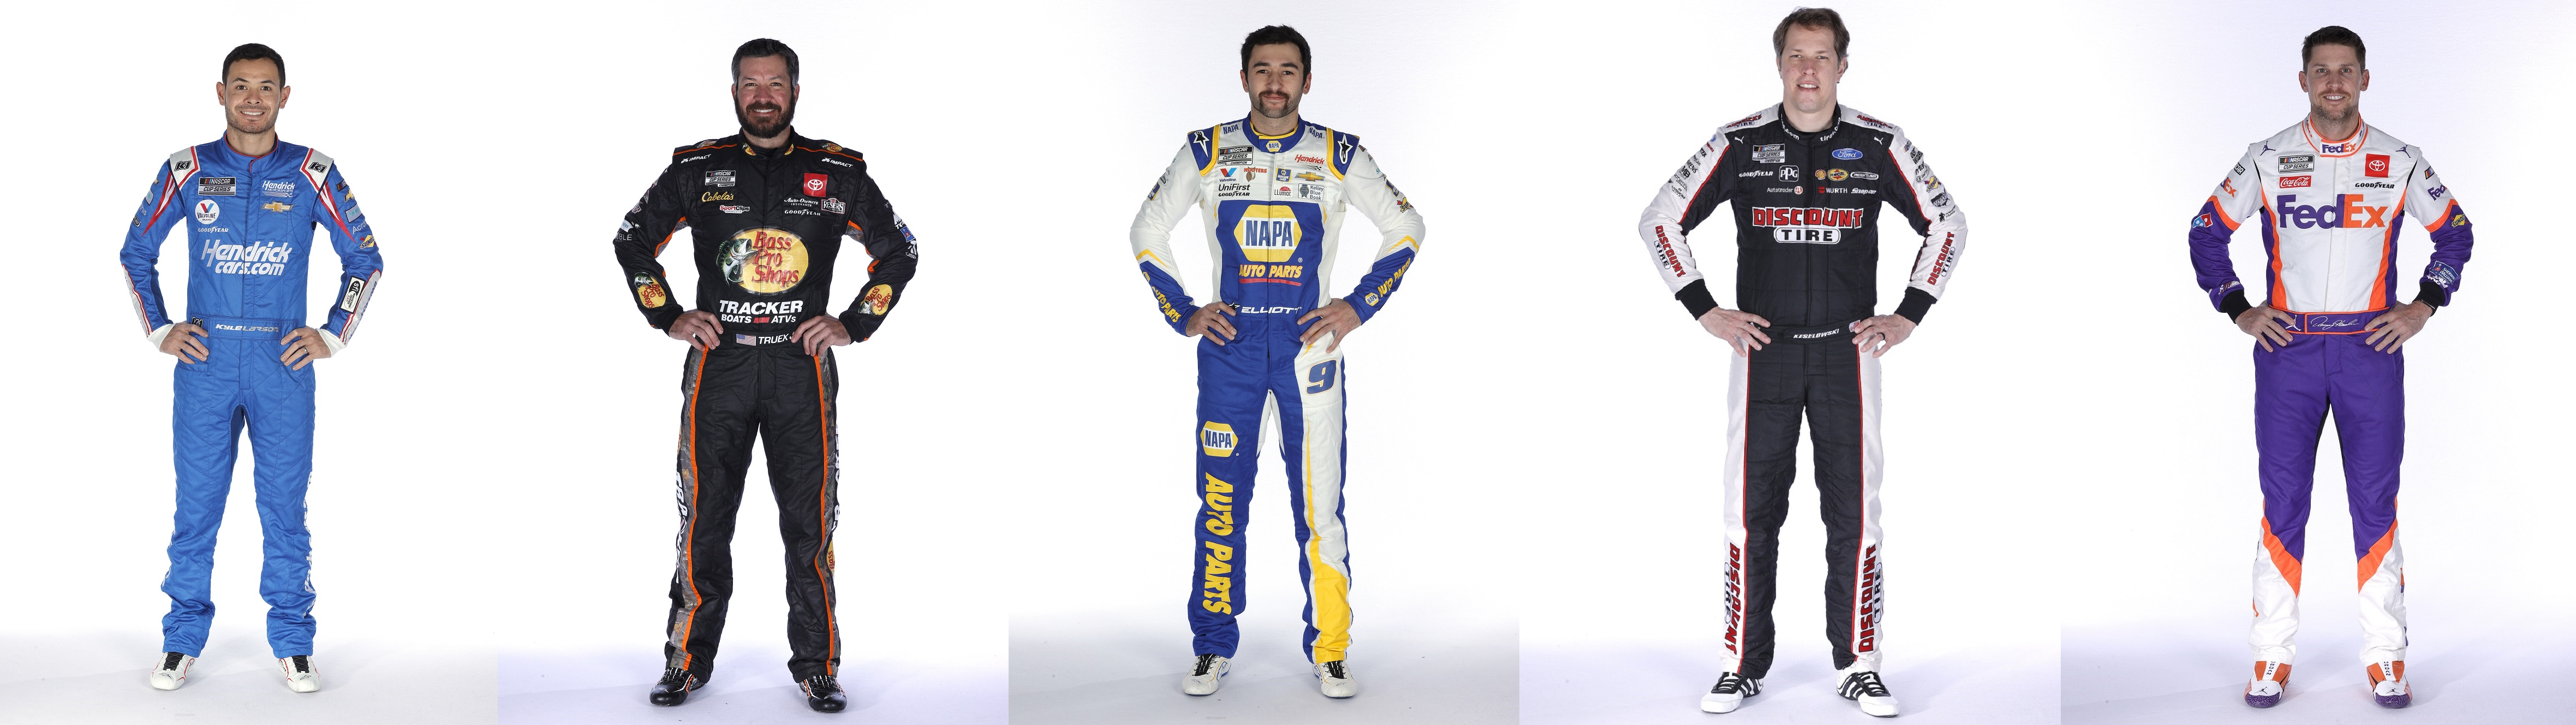 Now, this might be a logical quintet for Sunday evening's Coca-Cola 600 at Charlotte.